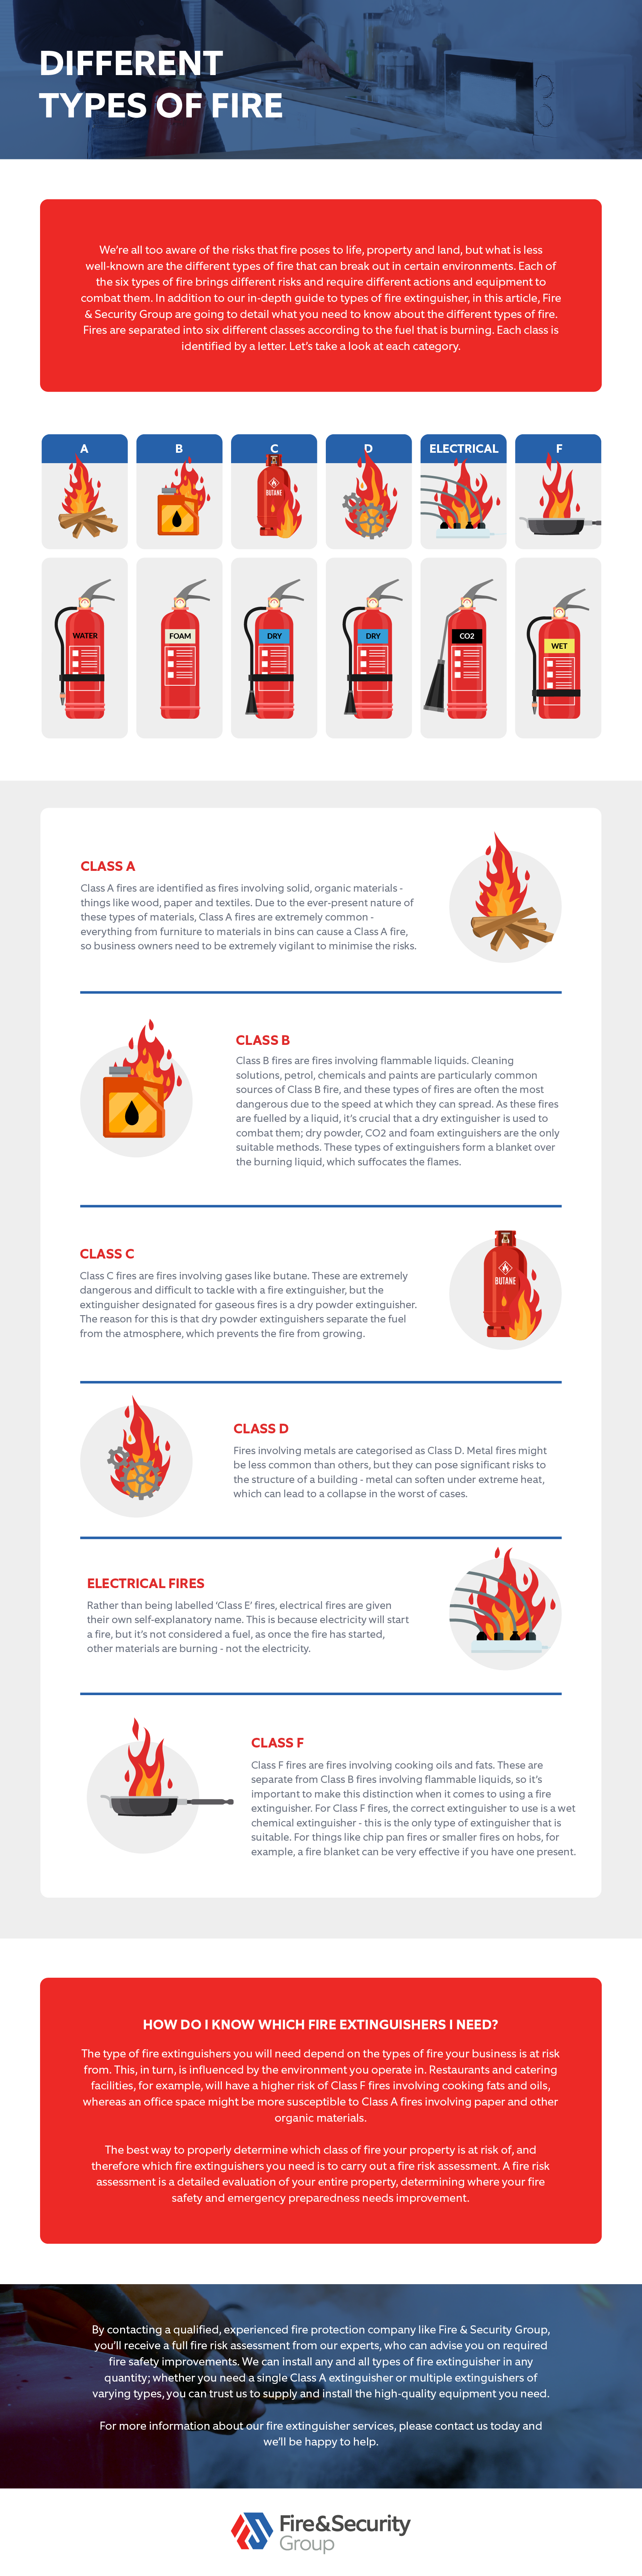 Fire-&-Security-Group_The_Different_Types_of_Fire